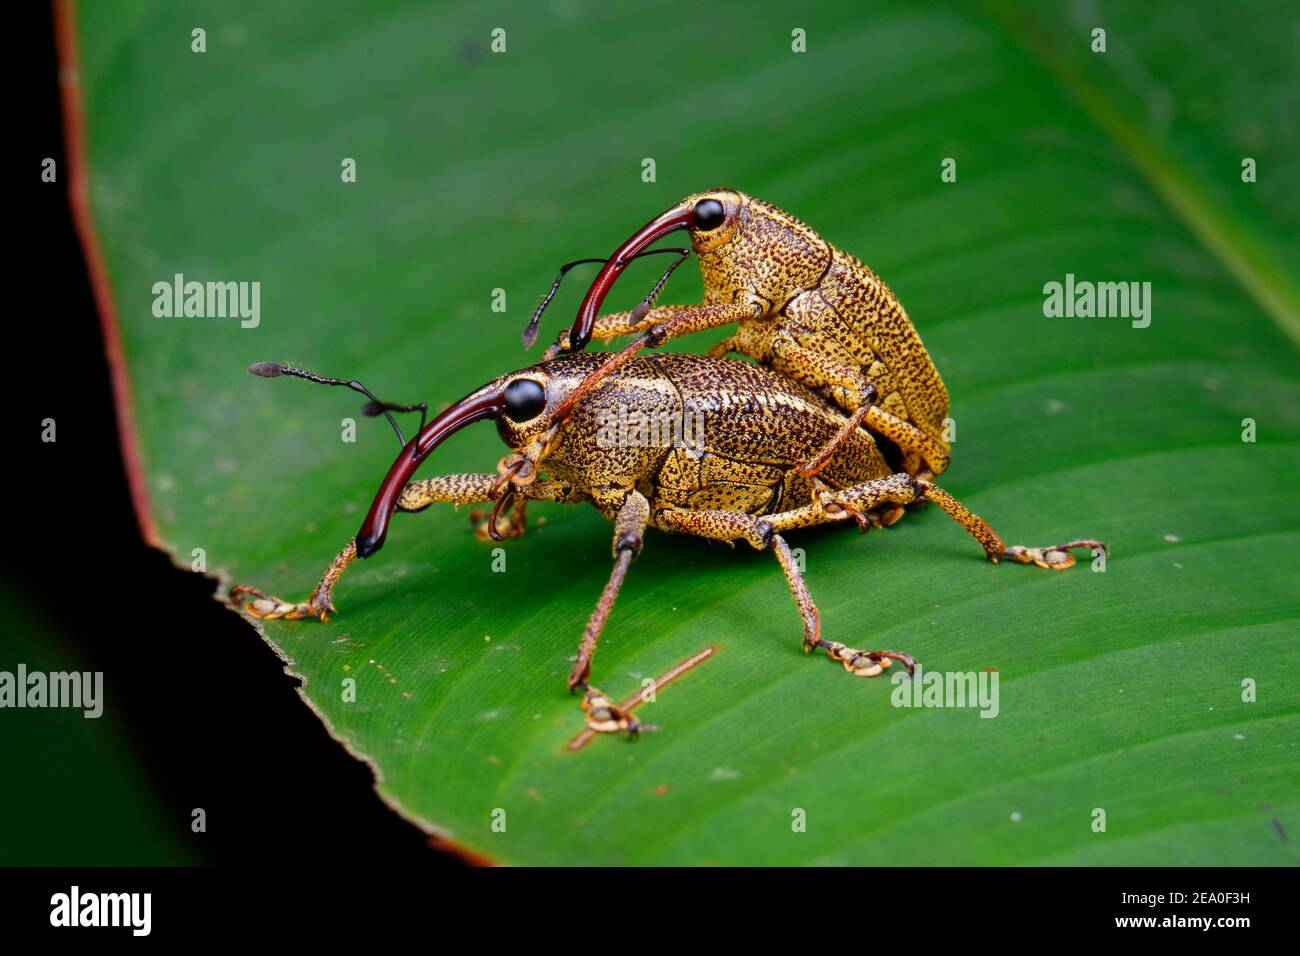 A pair of large inch long weevils, Cholus sp, are courting on  a leaf. Stock Photo